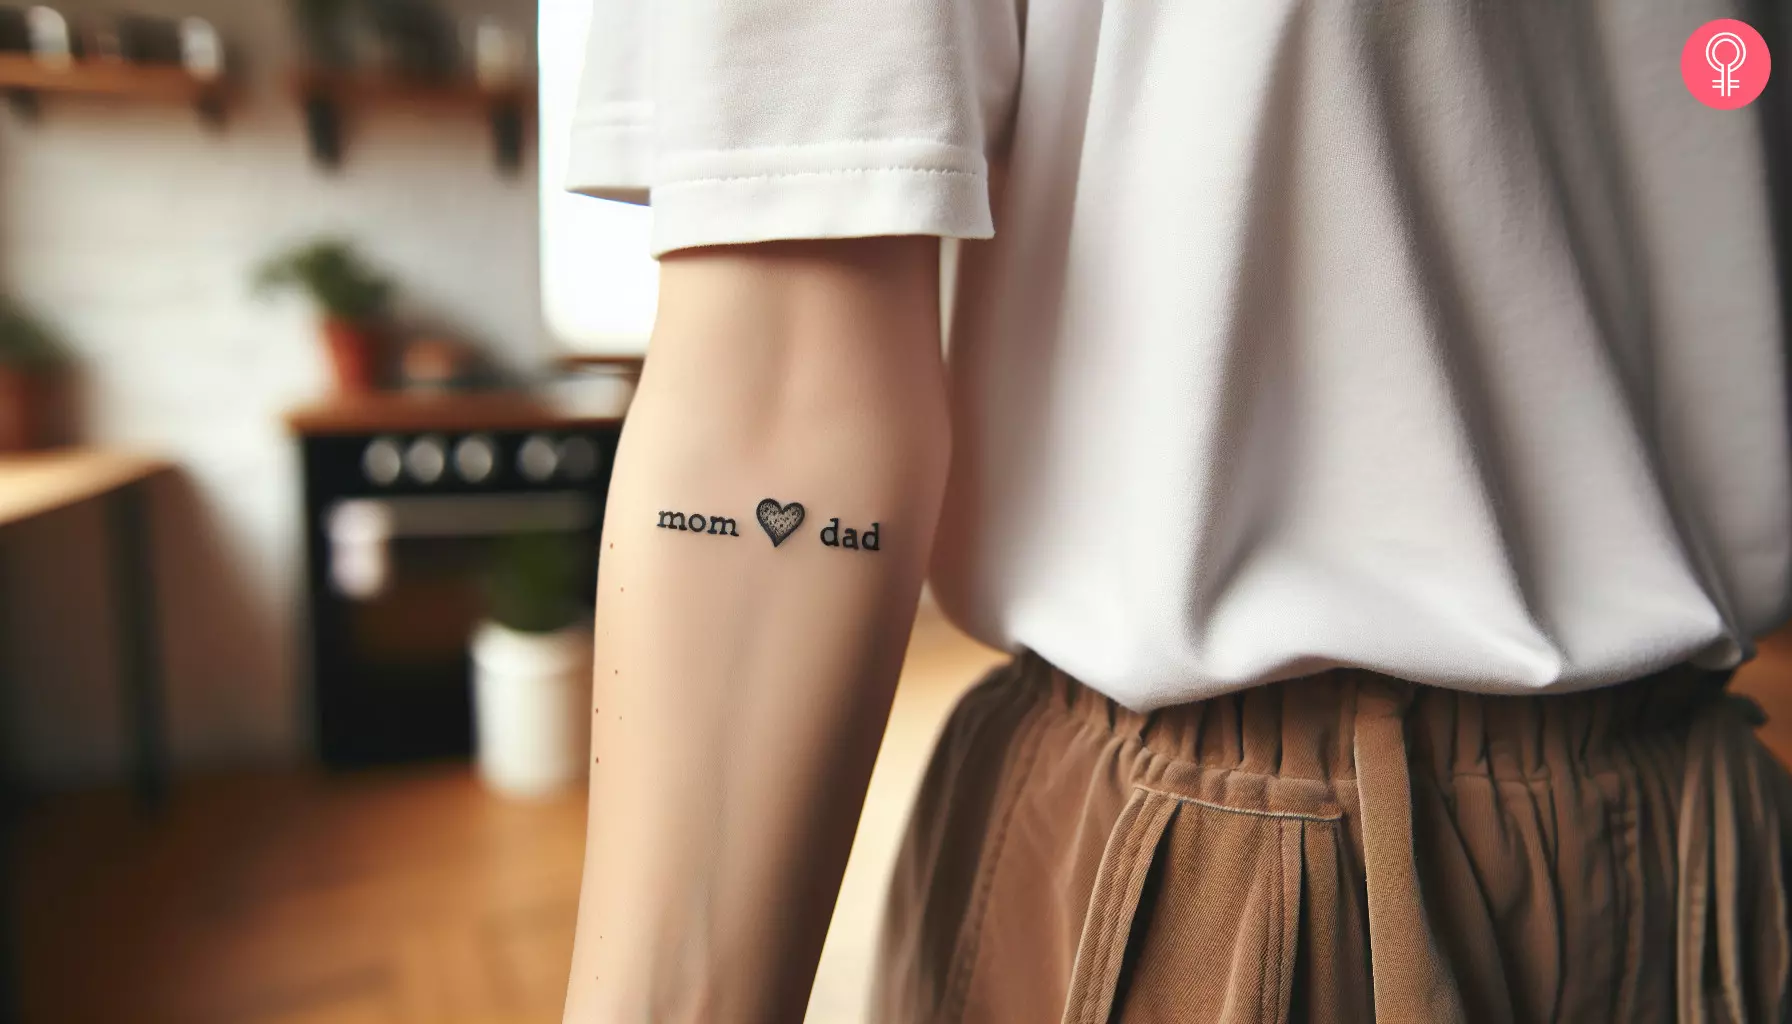 A heart tattoo with Mom and Dad written on the forearm